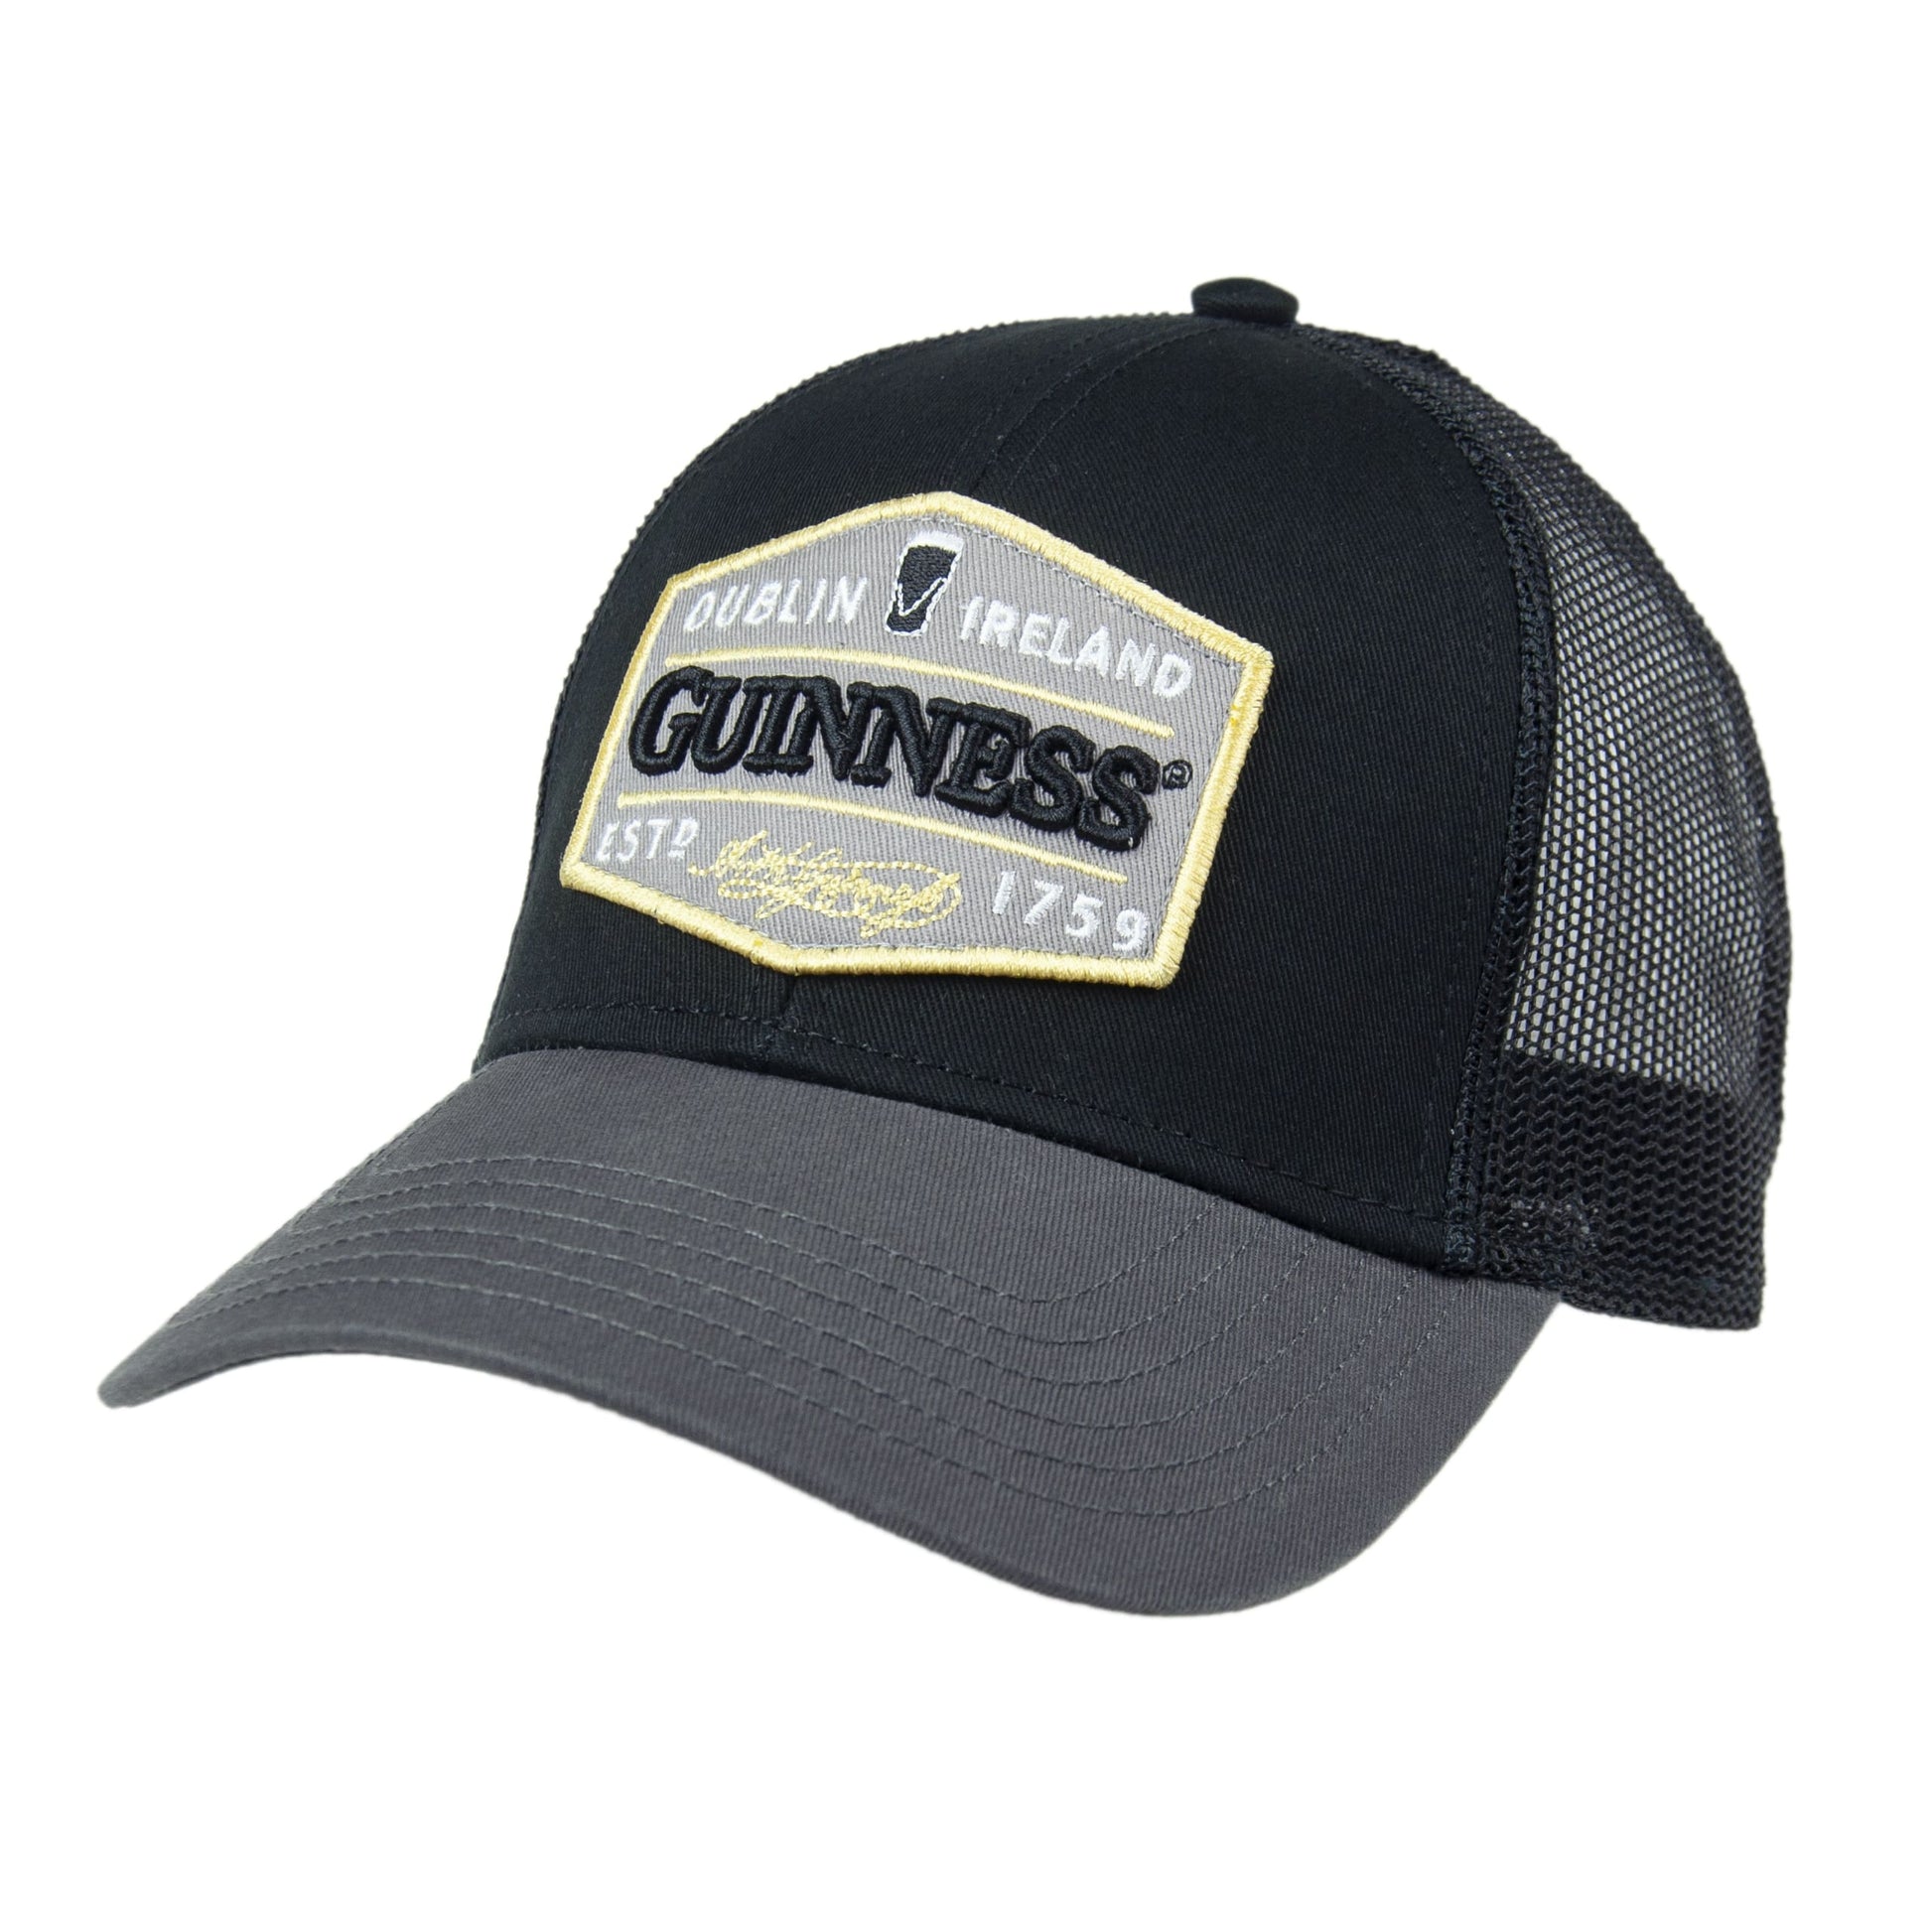 The black and grey Guinness UK trucker hat, "Guinness Trucker Premium Grey with Embroidered Patch Cap," is made of cotton.